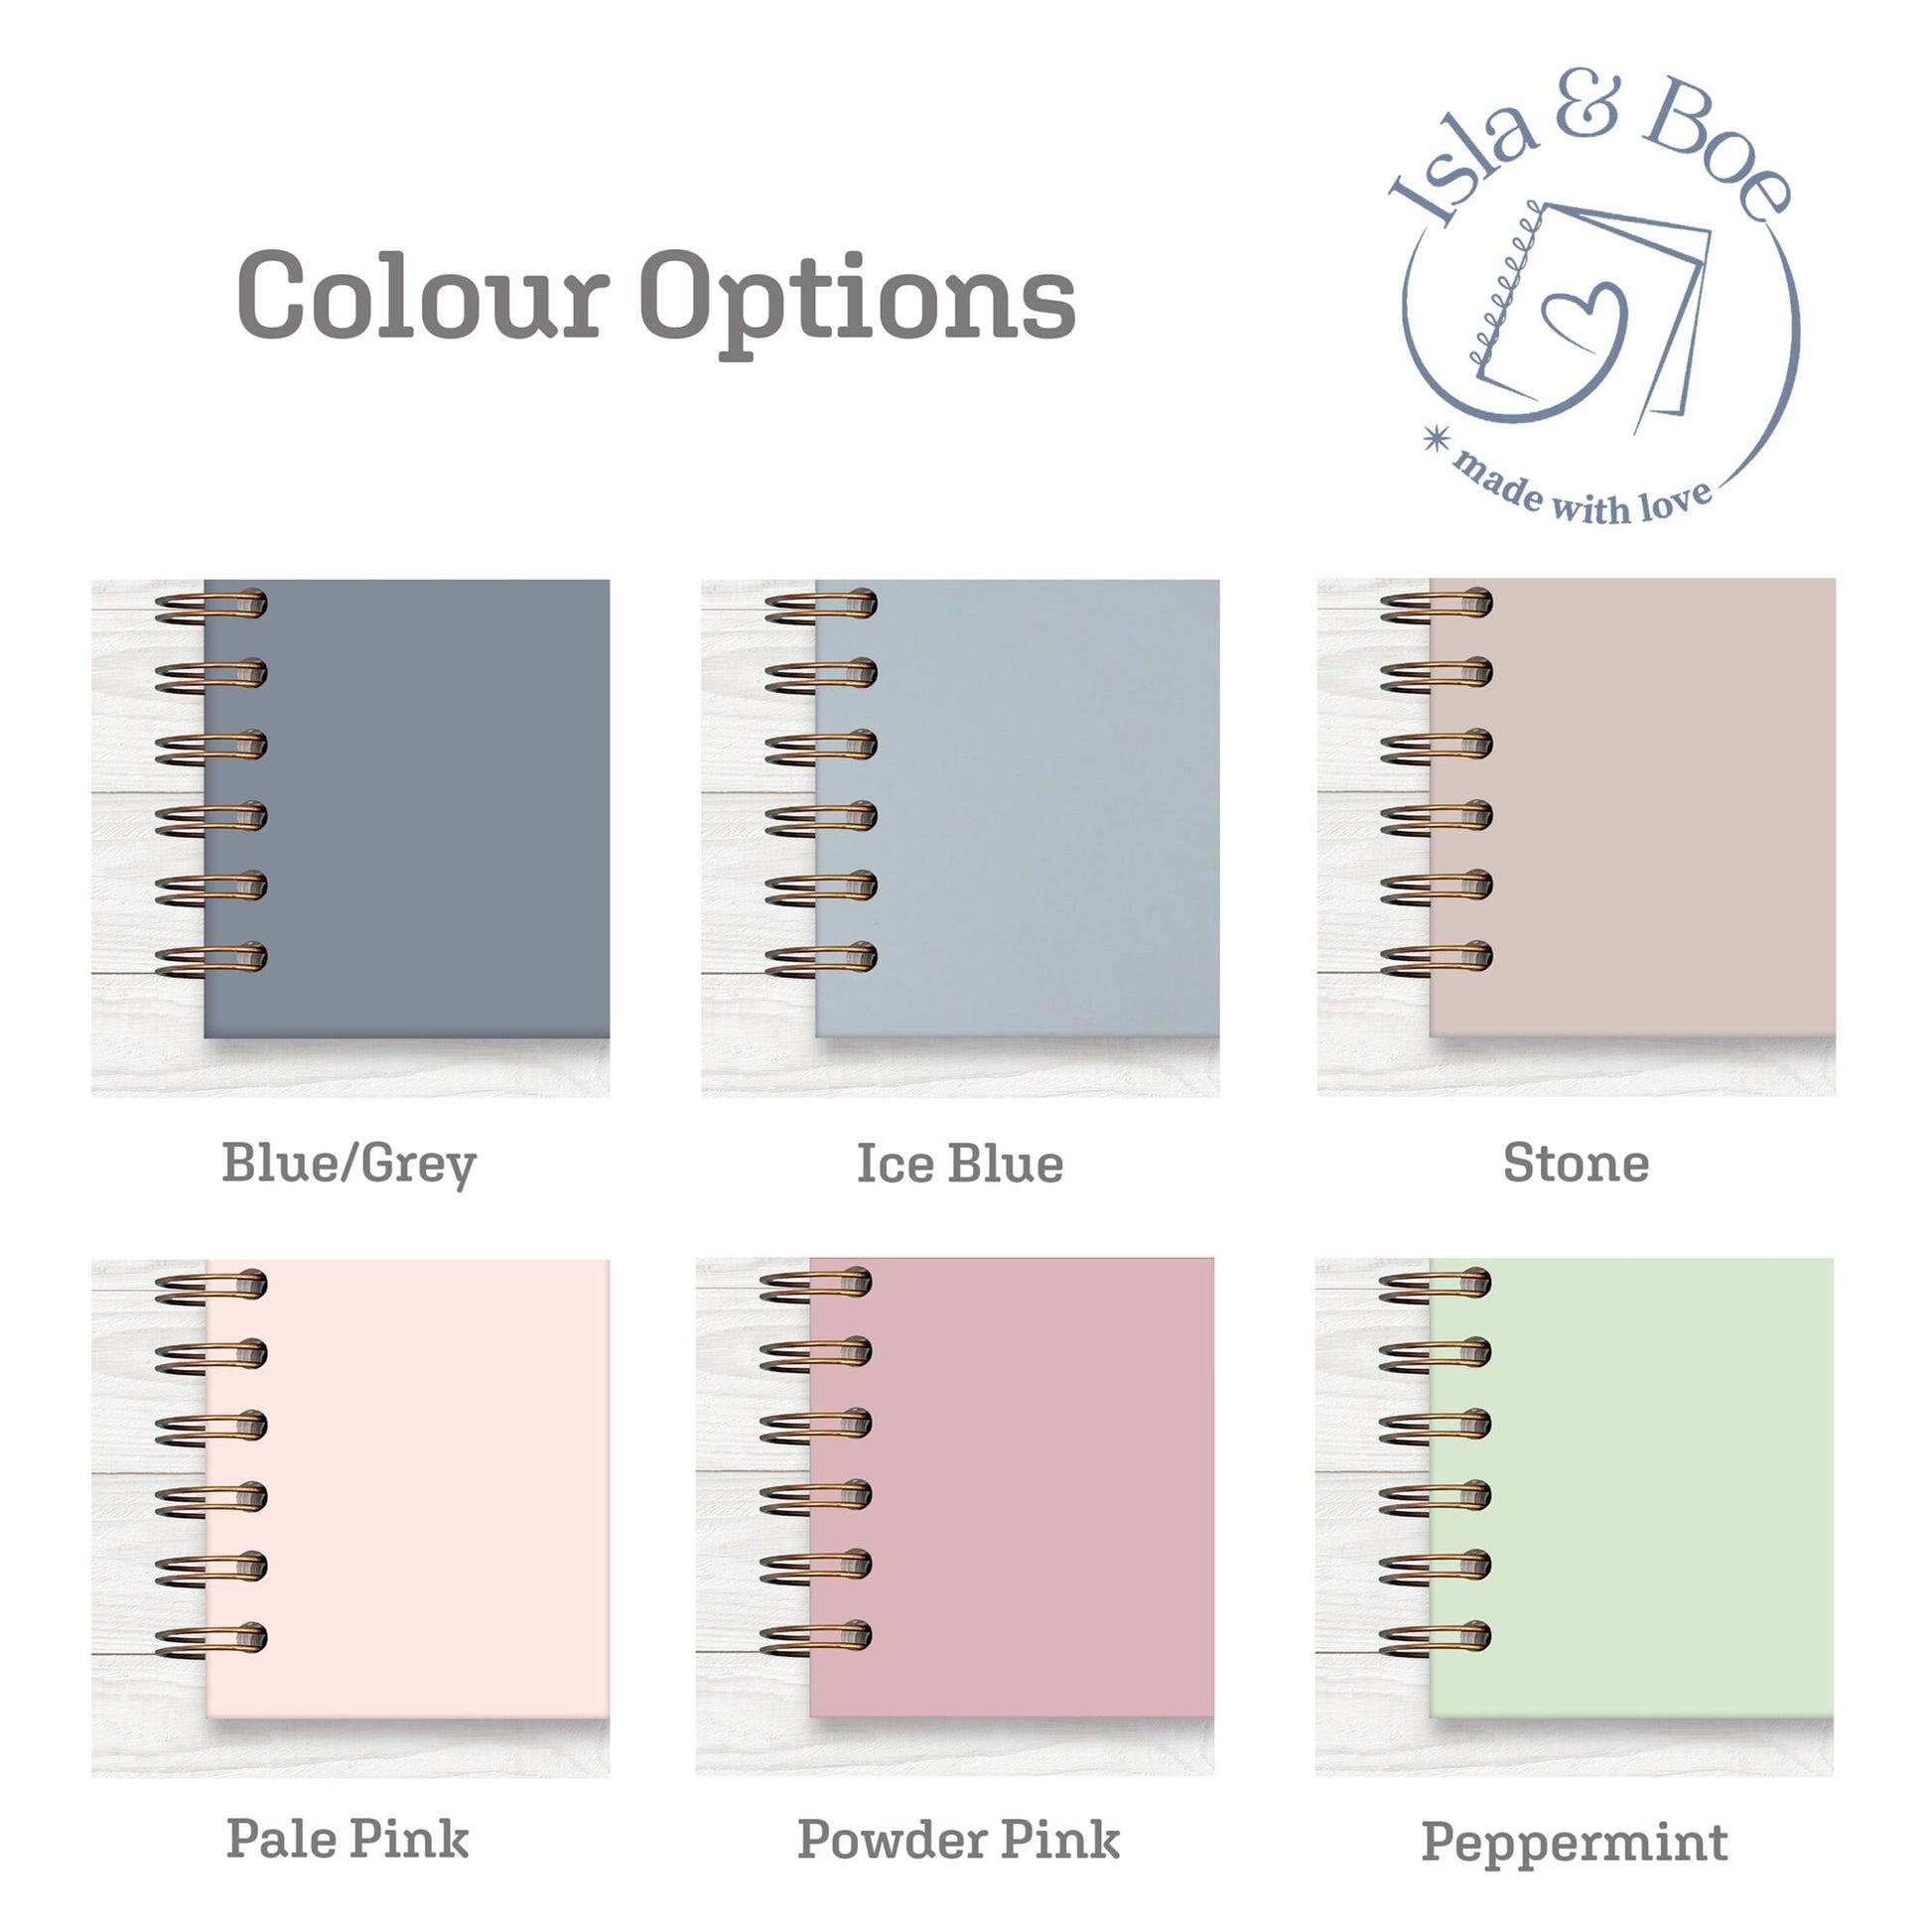 Colour swatch for the memory books. There is Blue/Grey, Ice Blue, Stone, Pale Pink, Powder pink and Peppermint